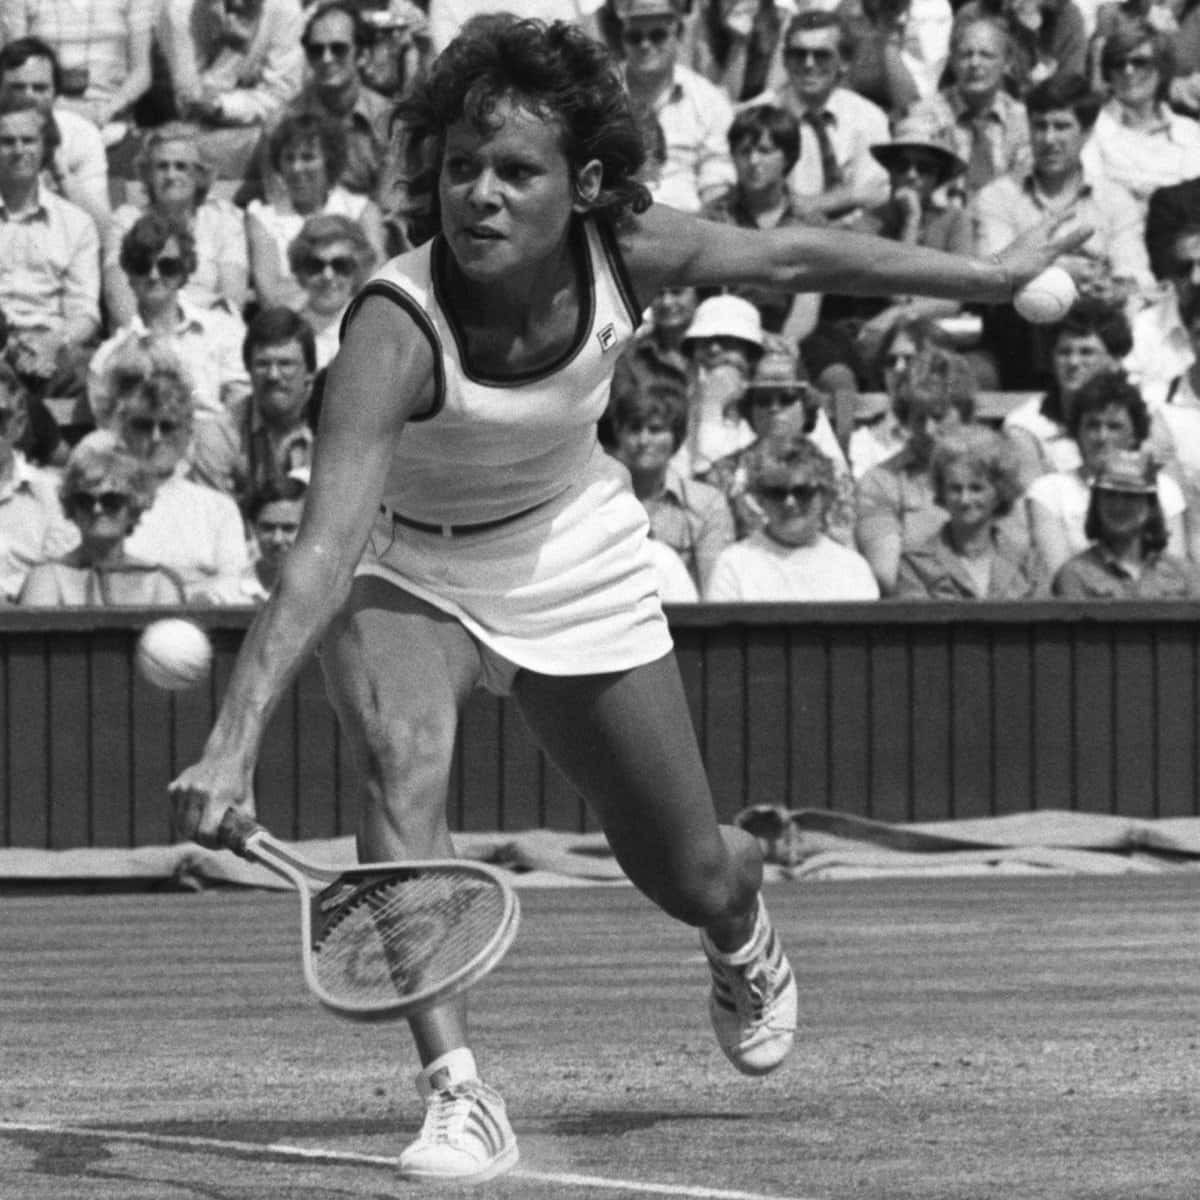 Evonne Goolagong Cawley in action on the tennis court Wallpaper